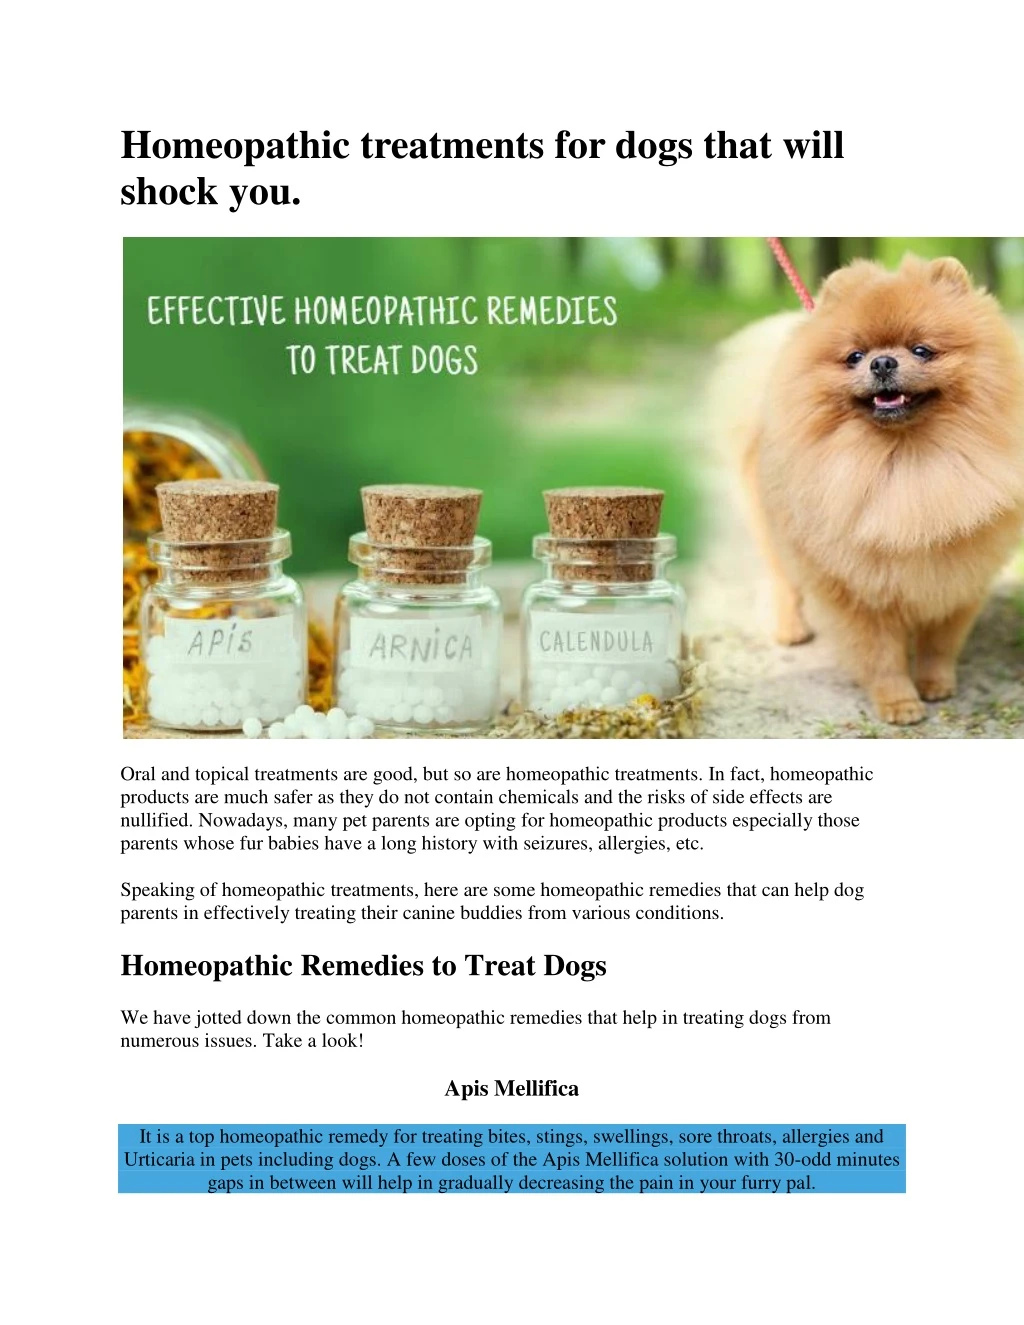 homeopathic treatments for dogs that will shock